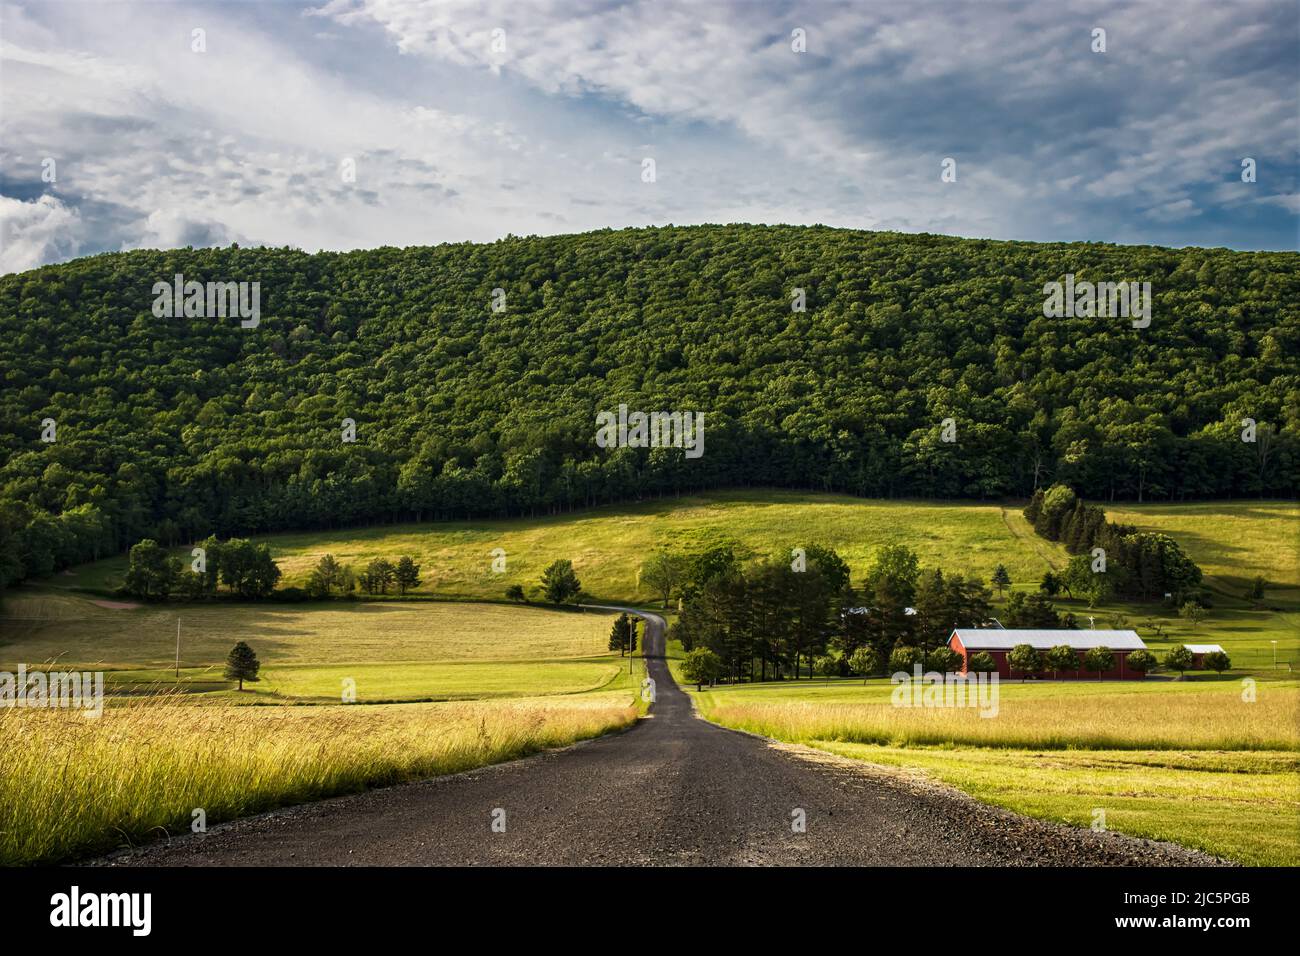 A back country road stretching down the center with grassy fields on either side and a lush green hill in the background under a blue sky above Stock Photo